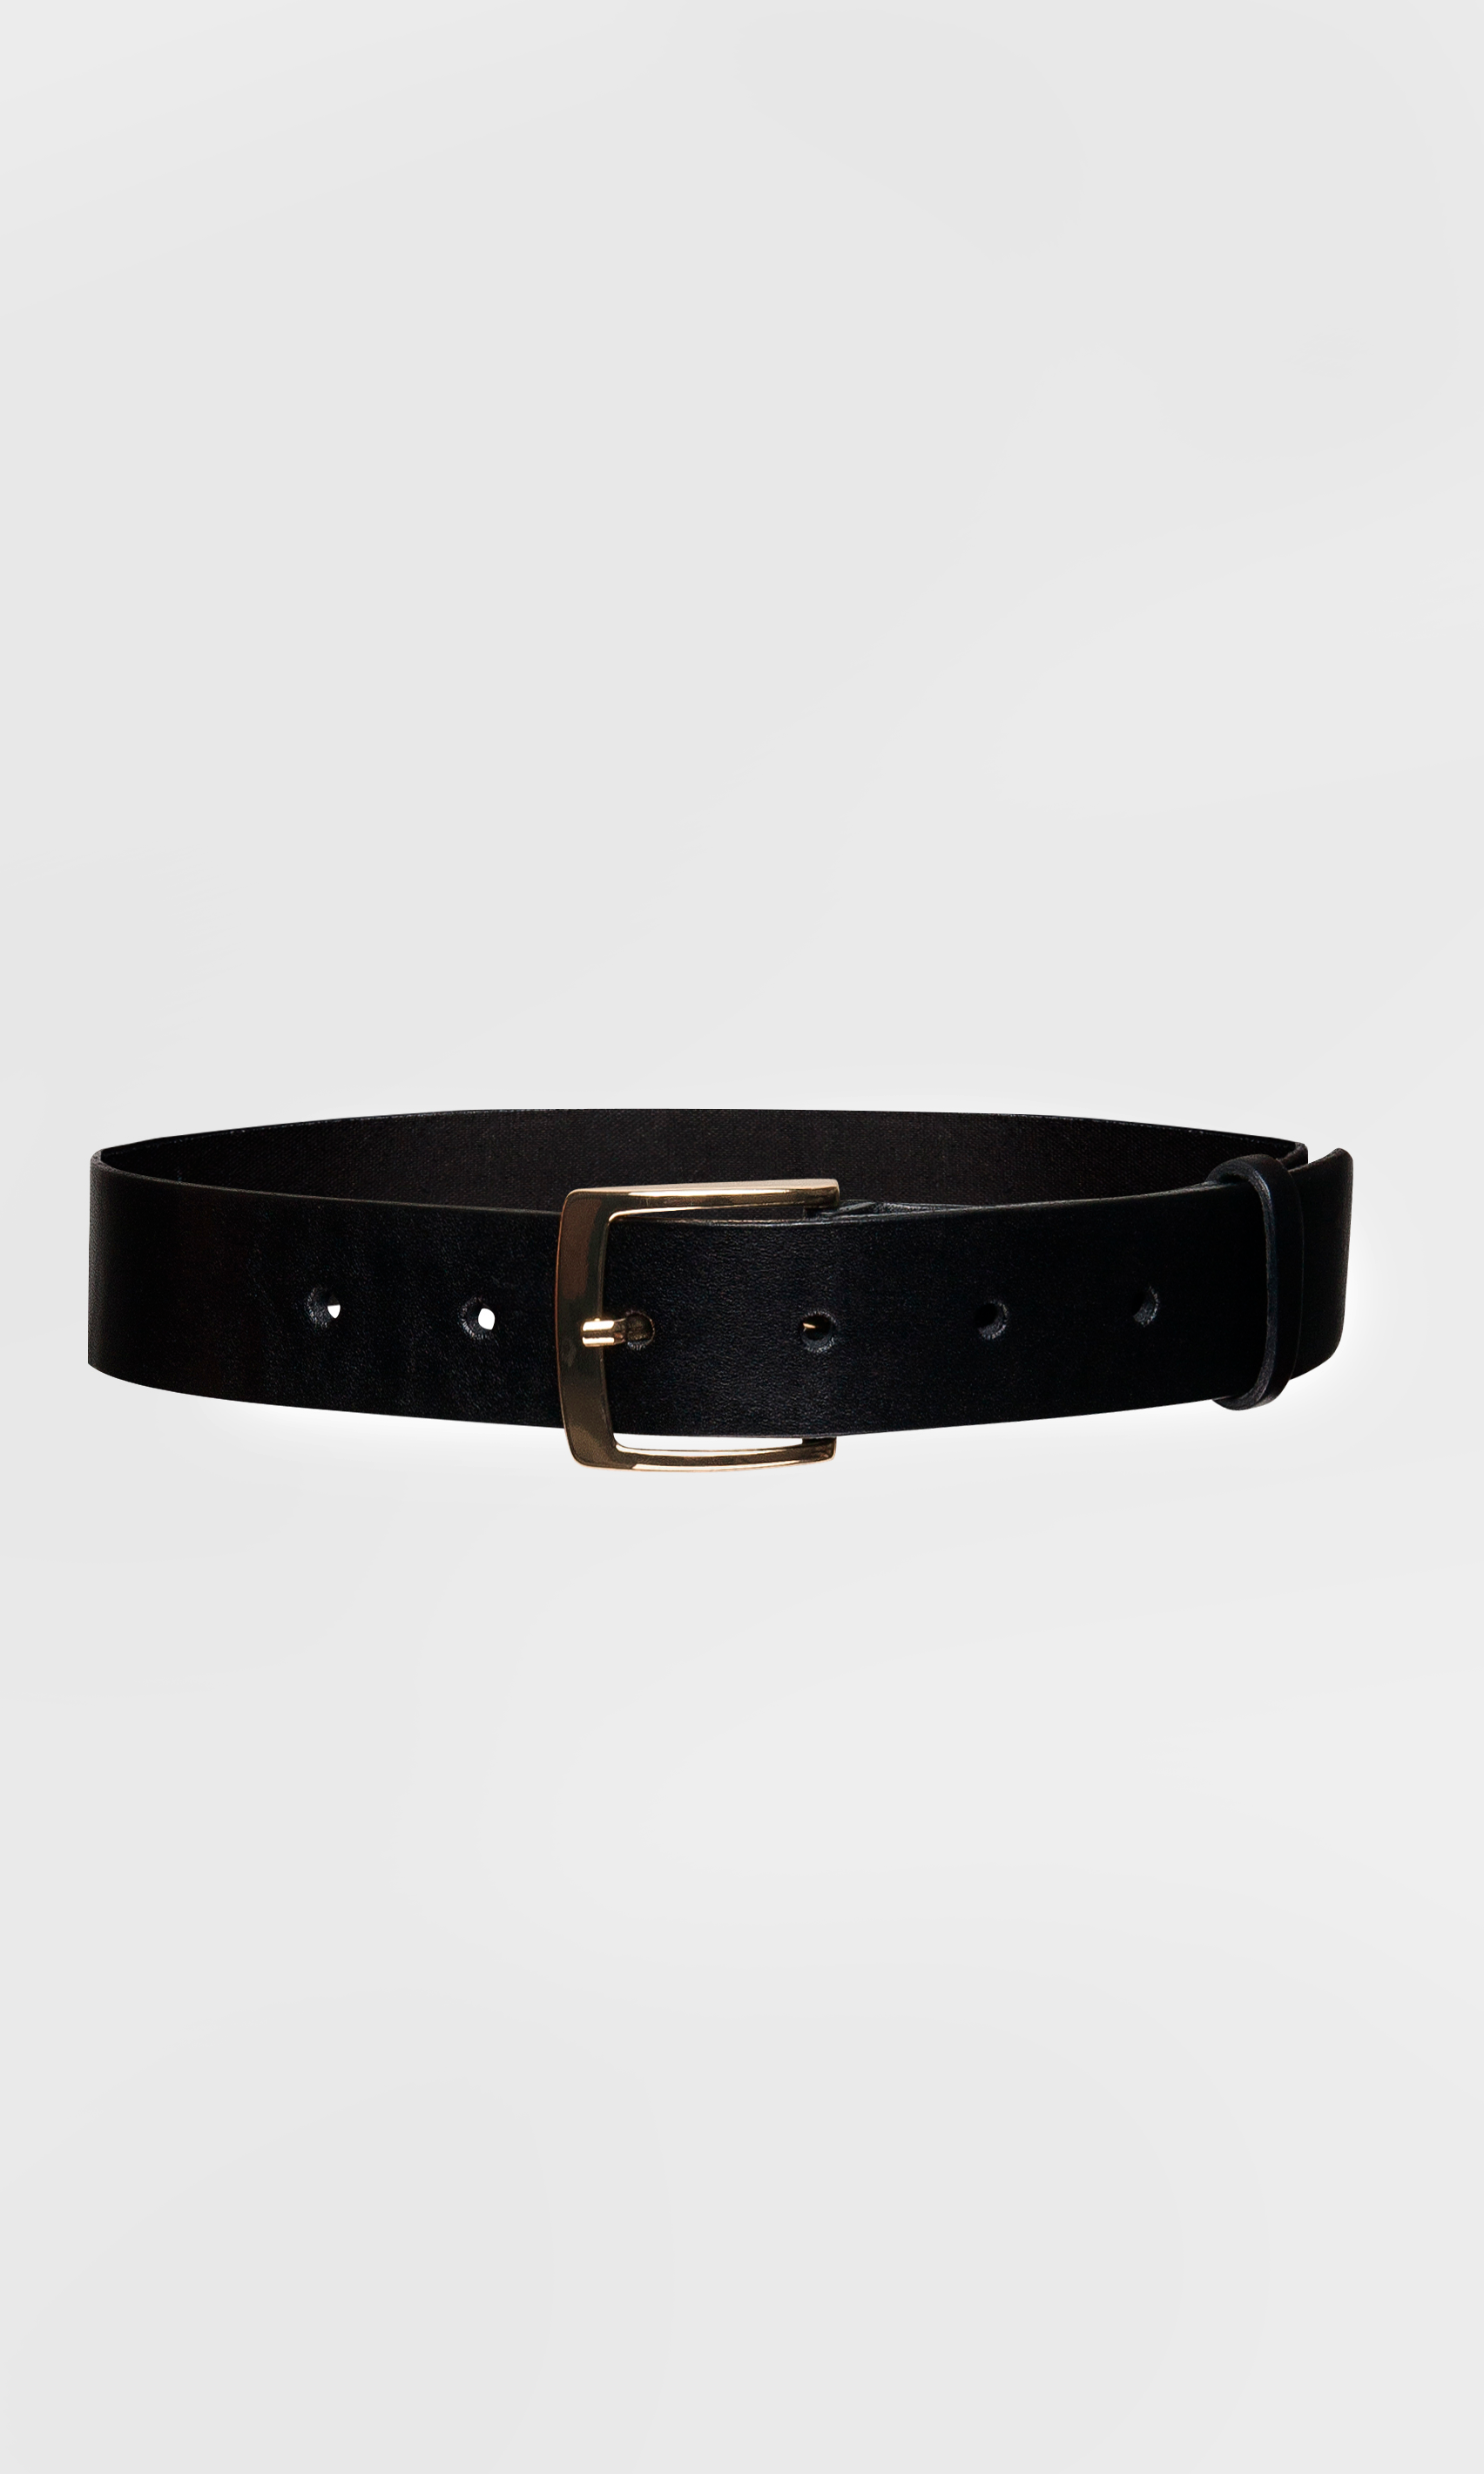 Black leather belt with square metal buckle, photo 3